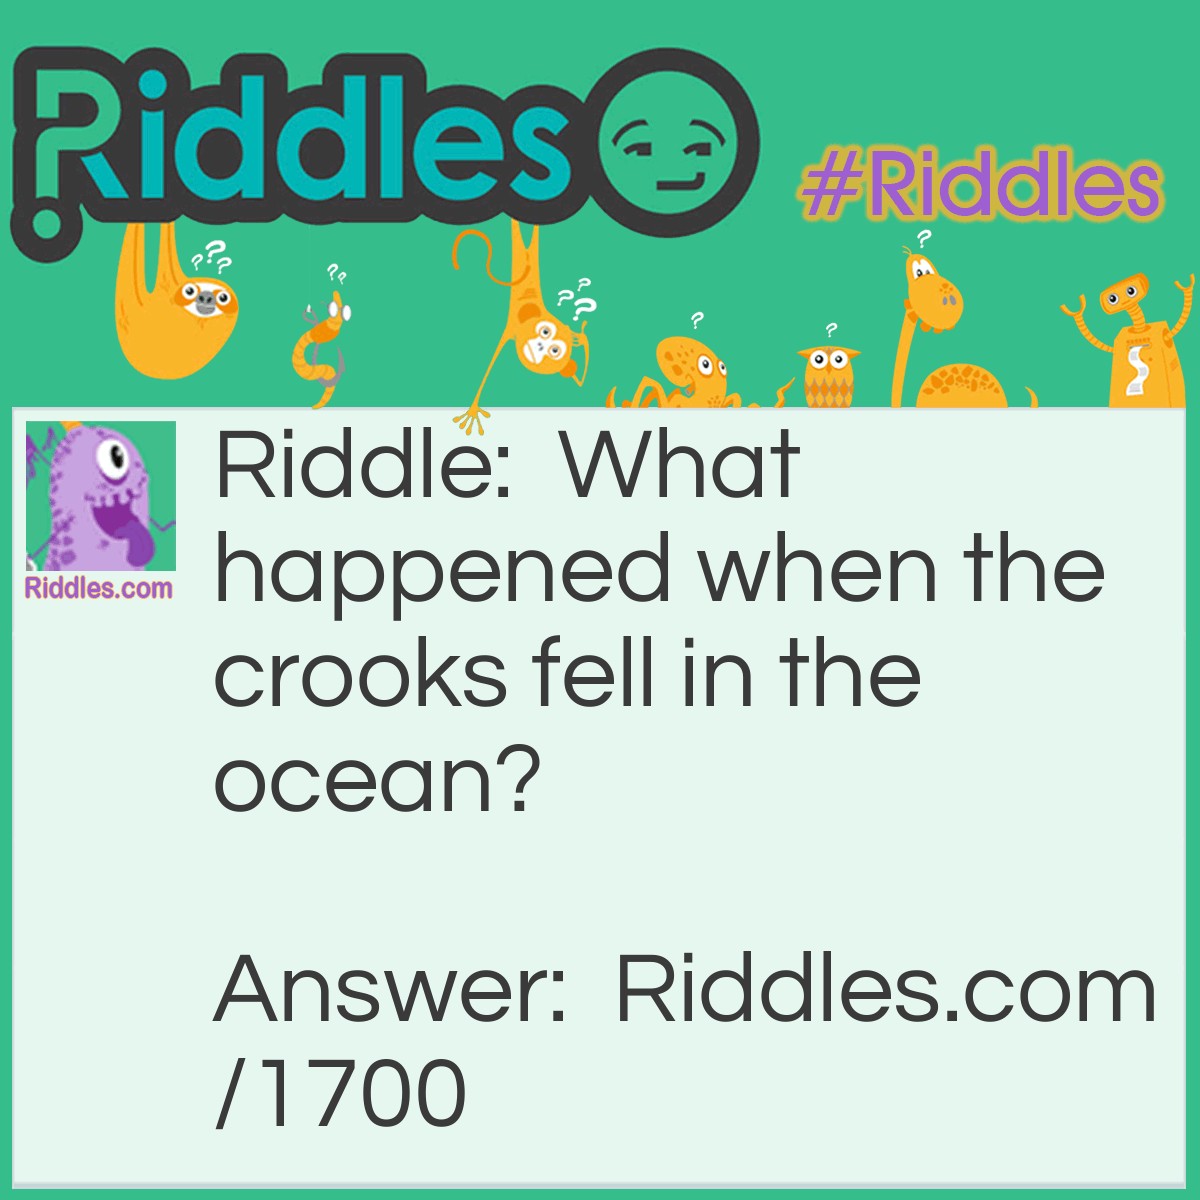 Riddle: What happened when the crooks fell into the ocean? Answer: They started a crime wave.